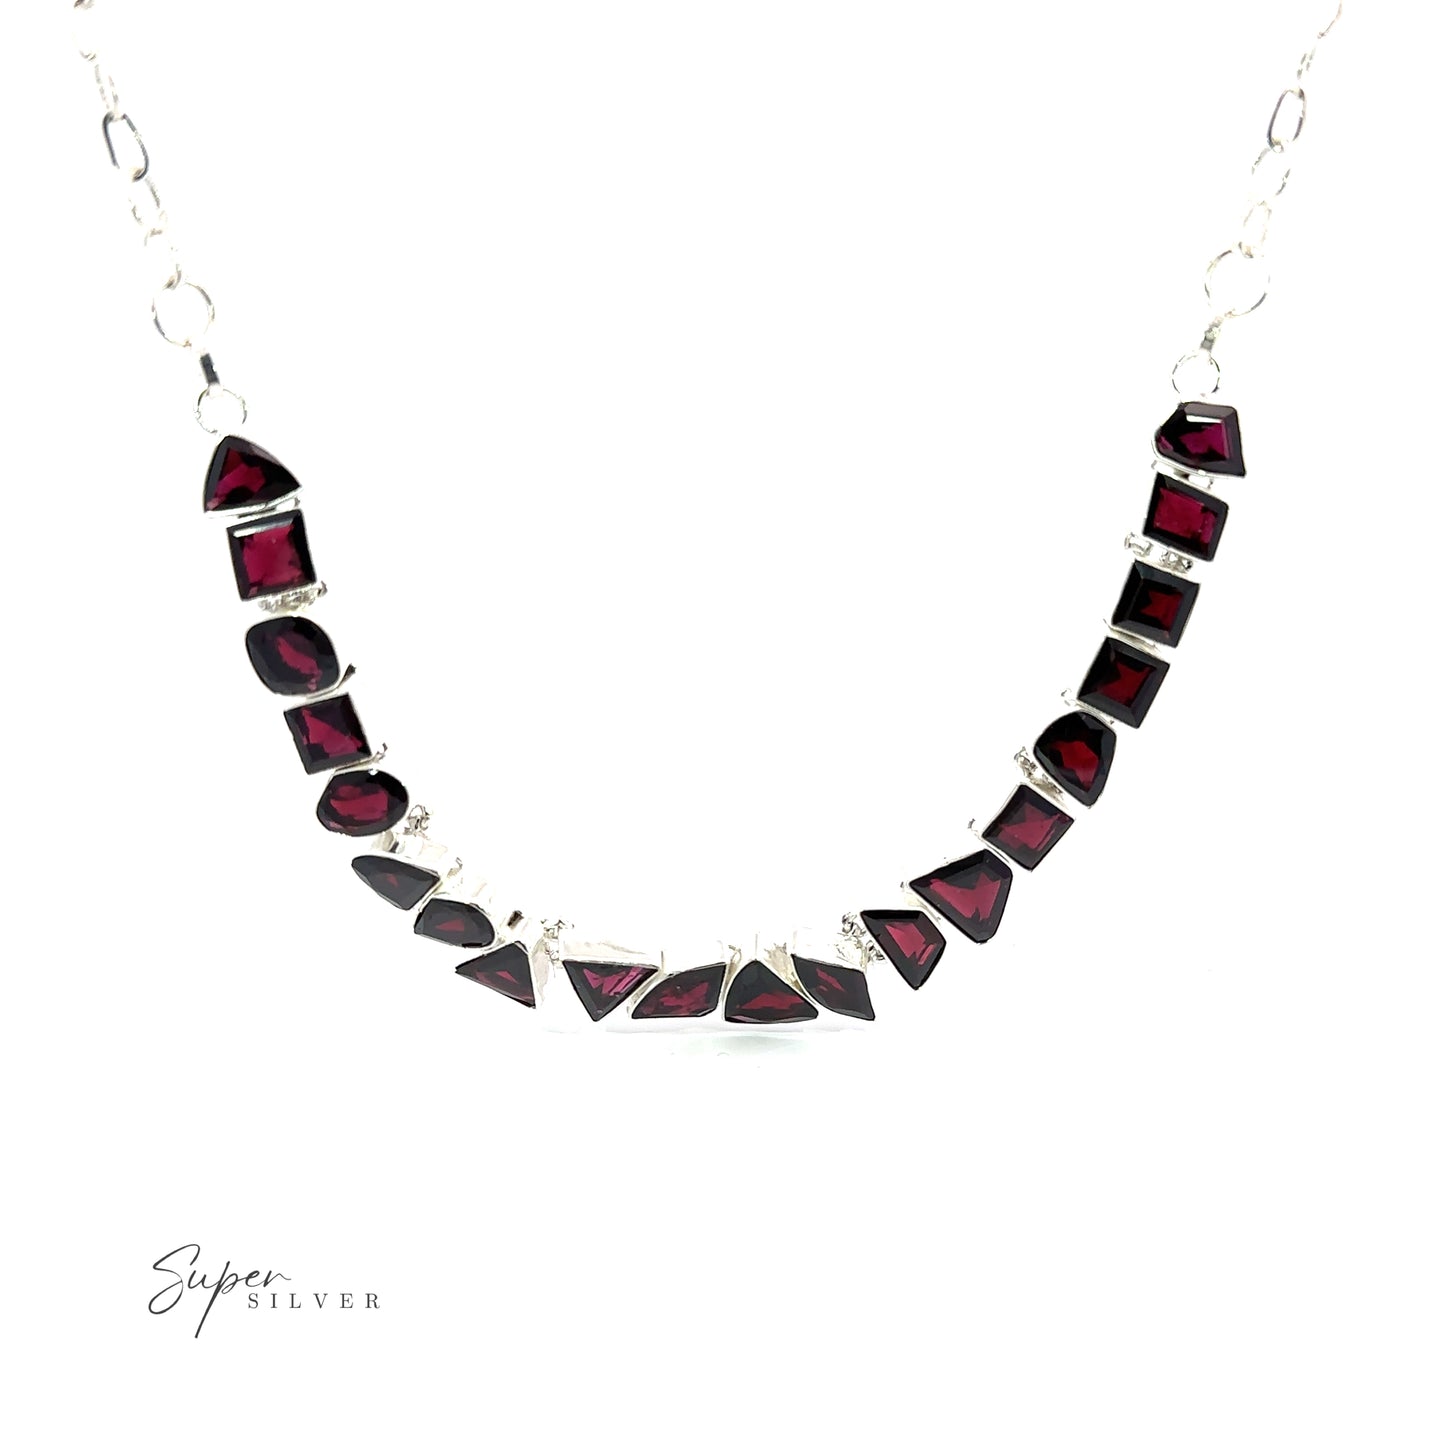 
                  
                    A Statement Gemstone Necklace featuring a series of deep red, irregularly shaped garnet stones, arranged in a curved pattern. The brand name "Super Silver" is visible in the bottom left corner.
                  
                